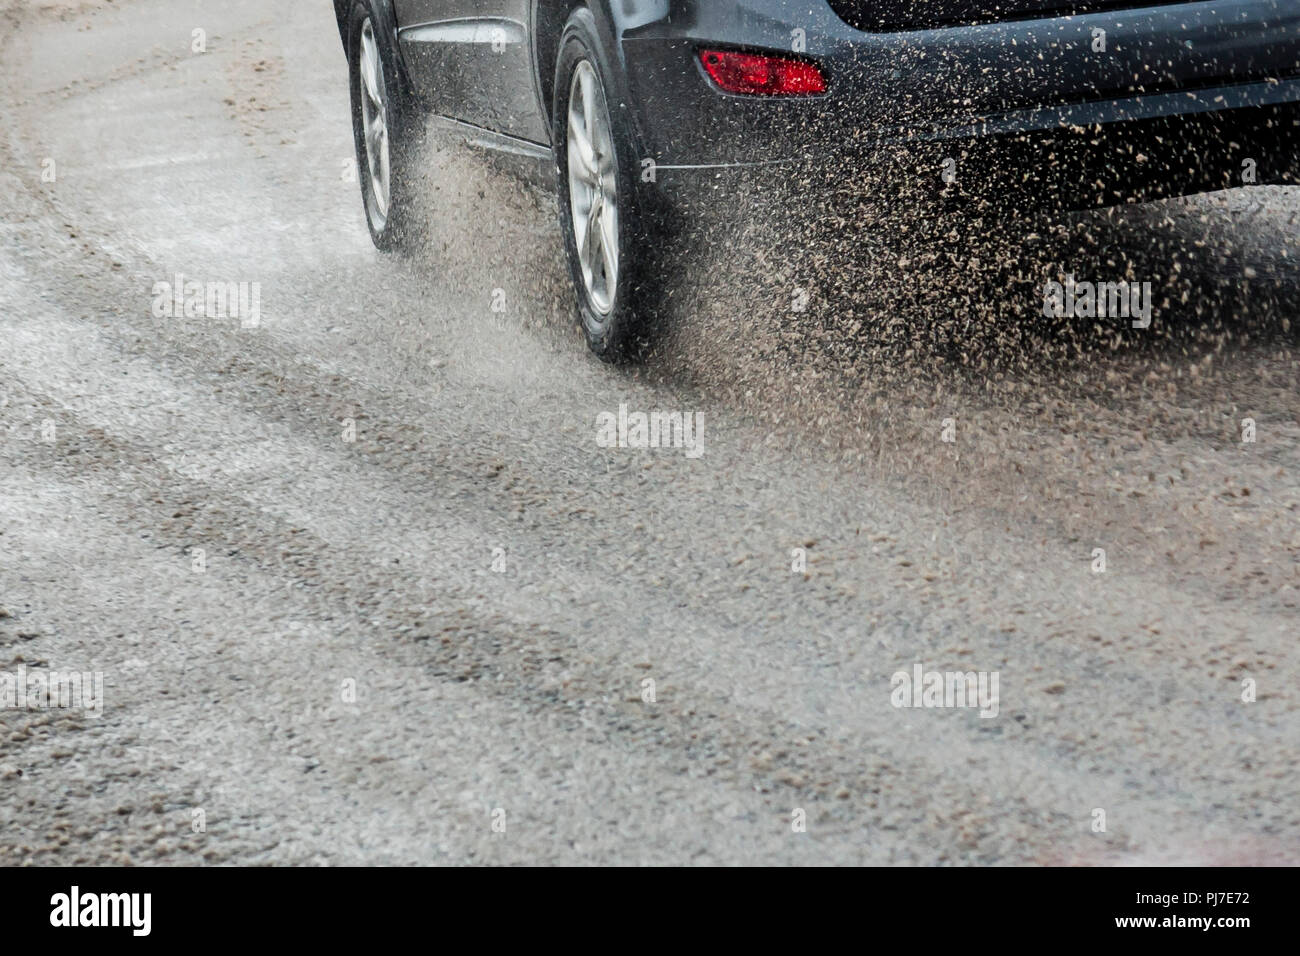 A passing car sprays an arc of icy water and slush. Stock Photo